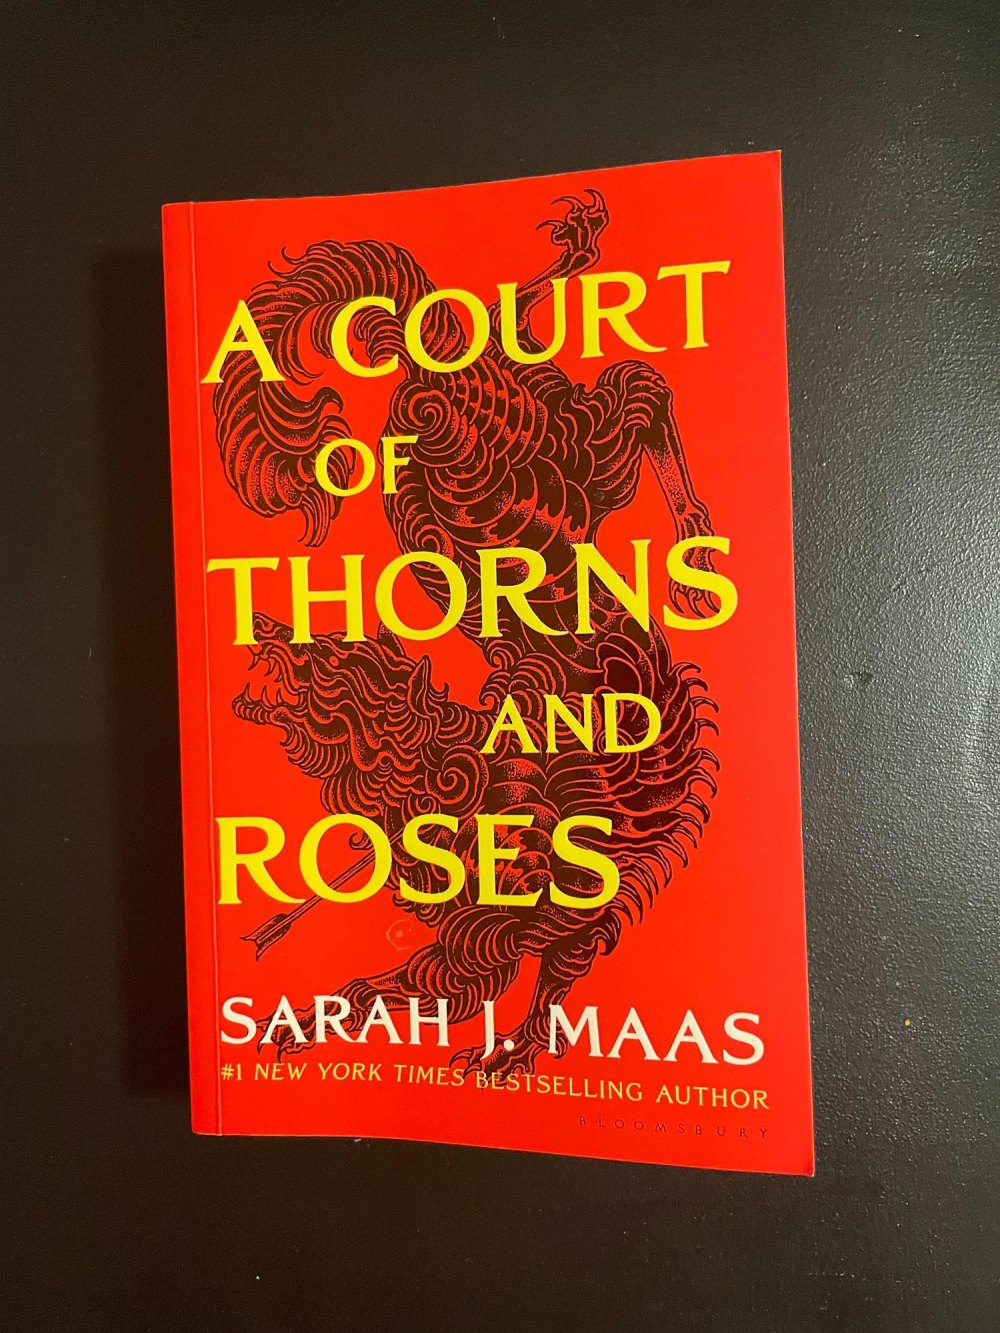 Sarah J Maas A Court of Thorns and Roses Show Adaptation Is No Longer in the Works at Hulu 090